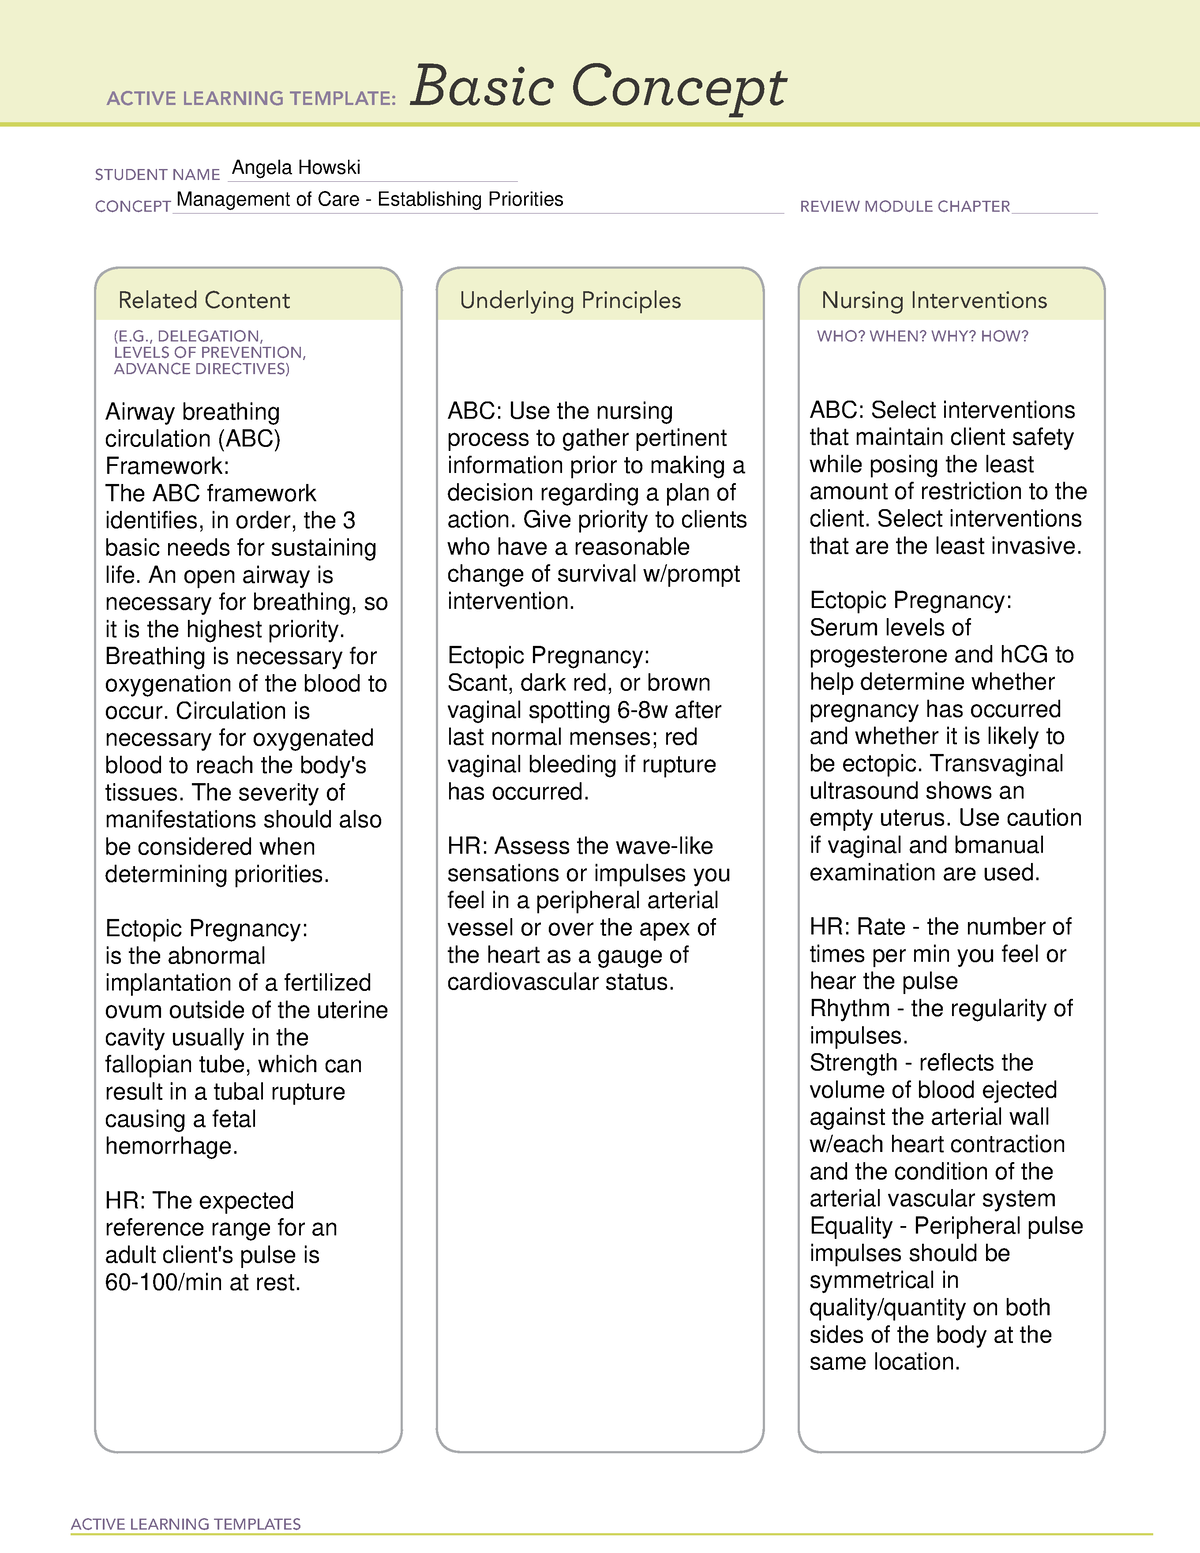 Remediation B Template Establishing Priorities ACTIVE LEARNING